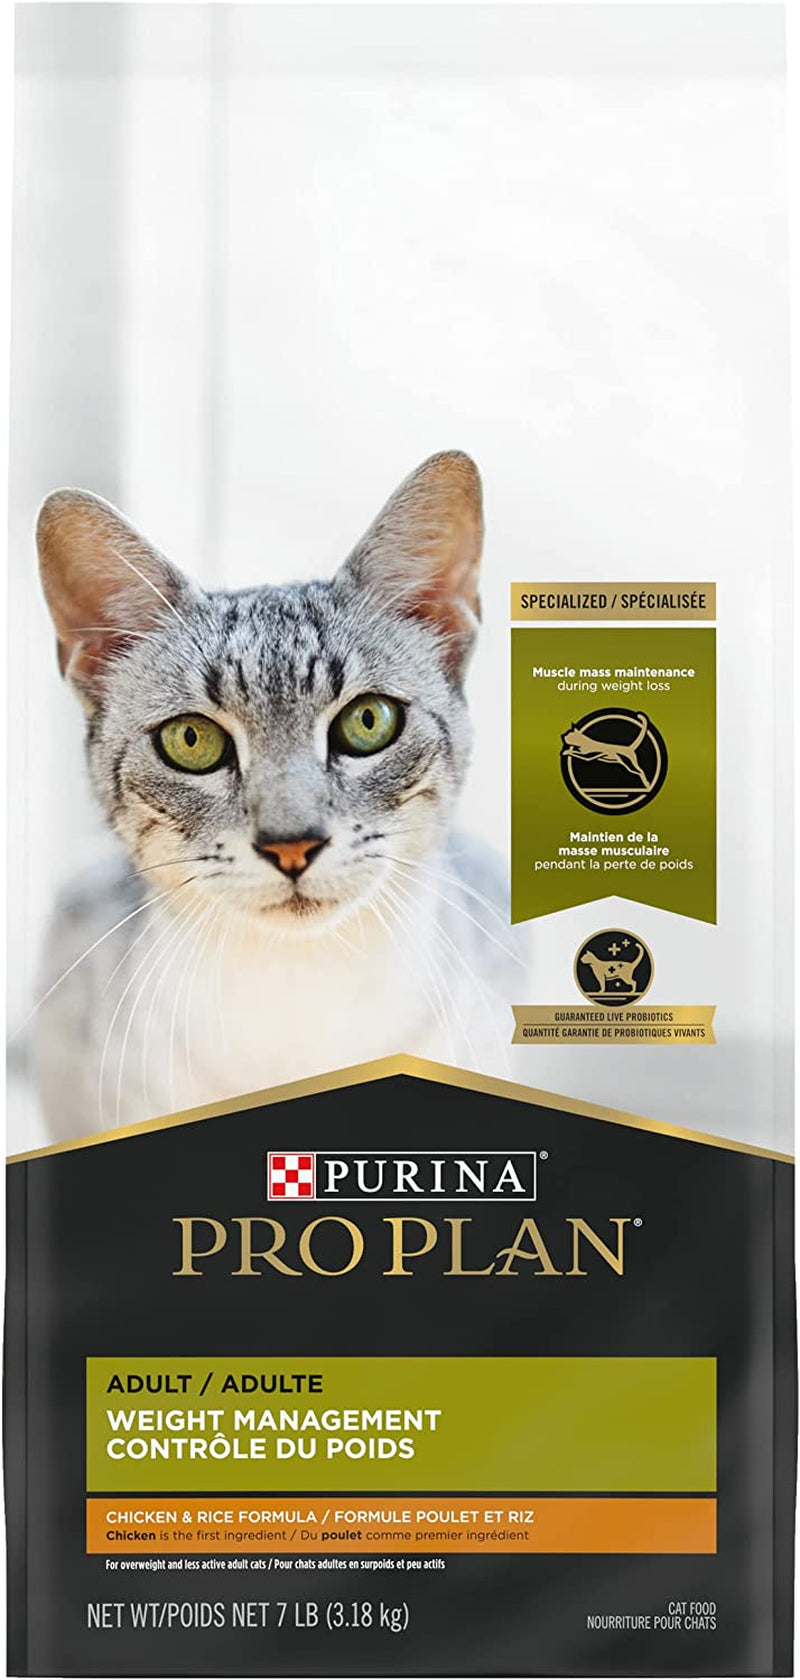 Purina Pro Plan Weight Control Dry Cat Food, Chicken and Rice Formula - 7 Lb. Bag